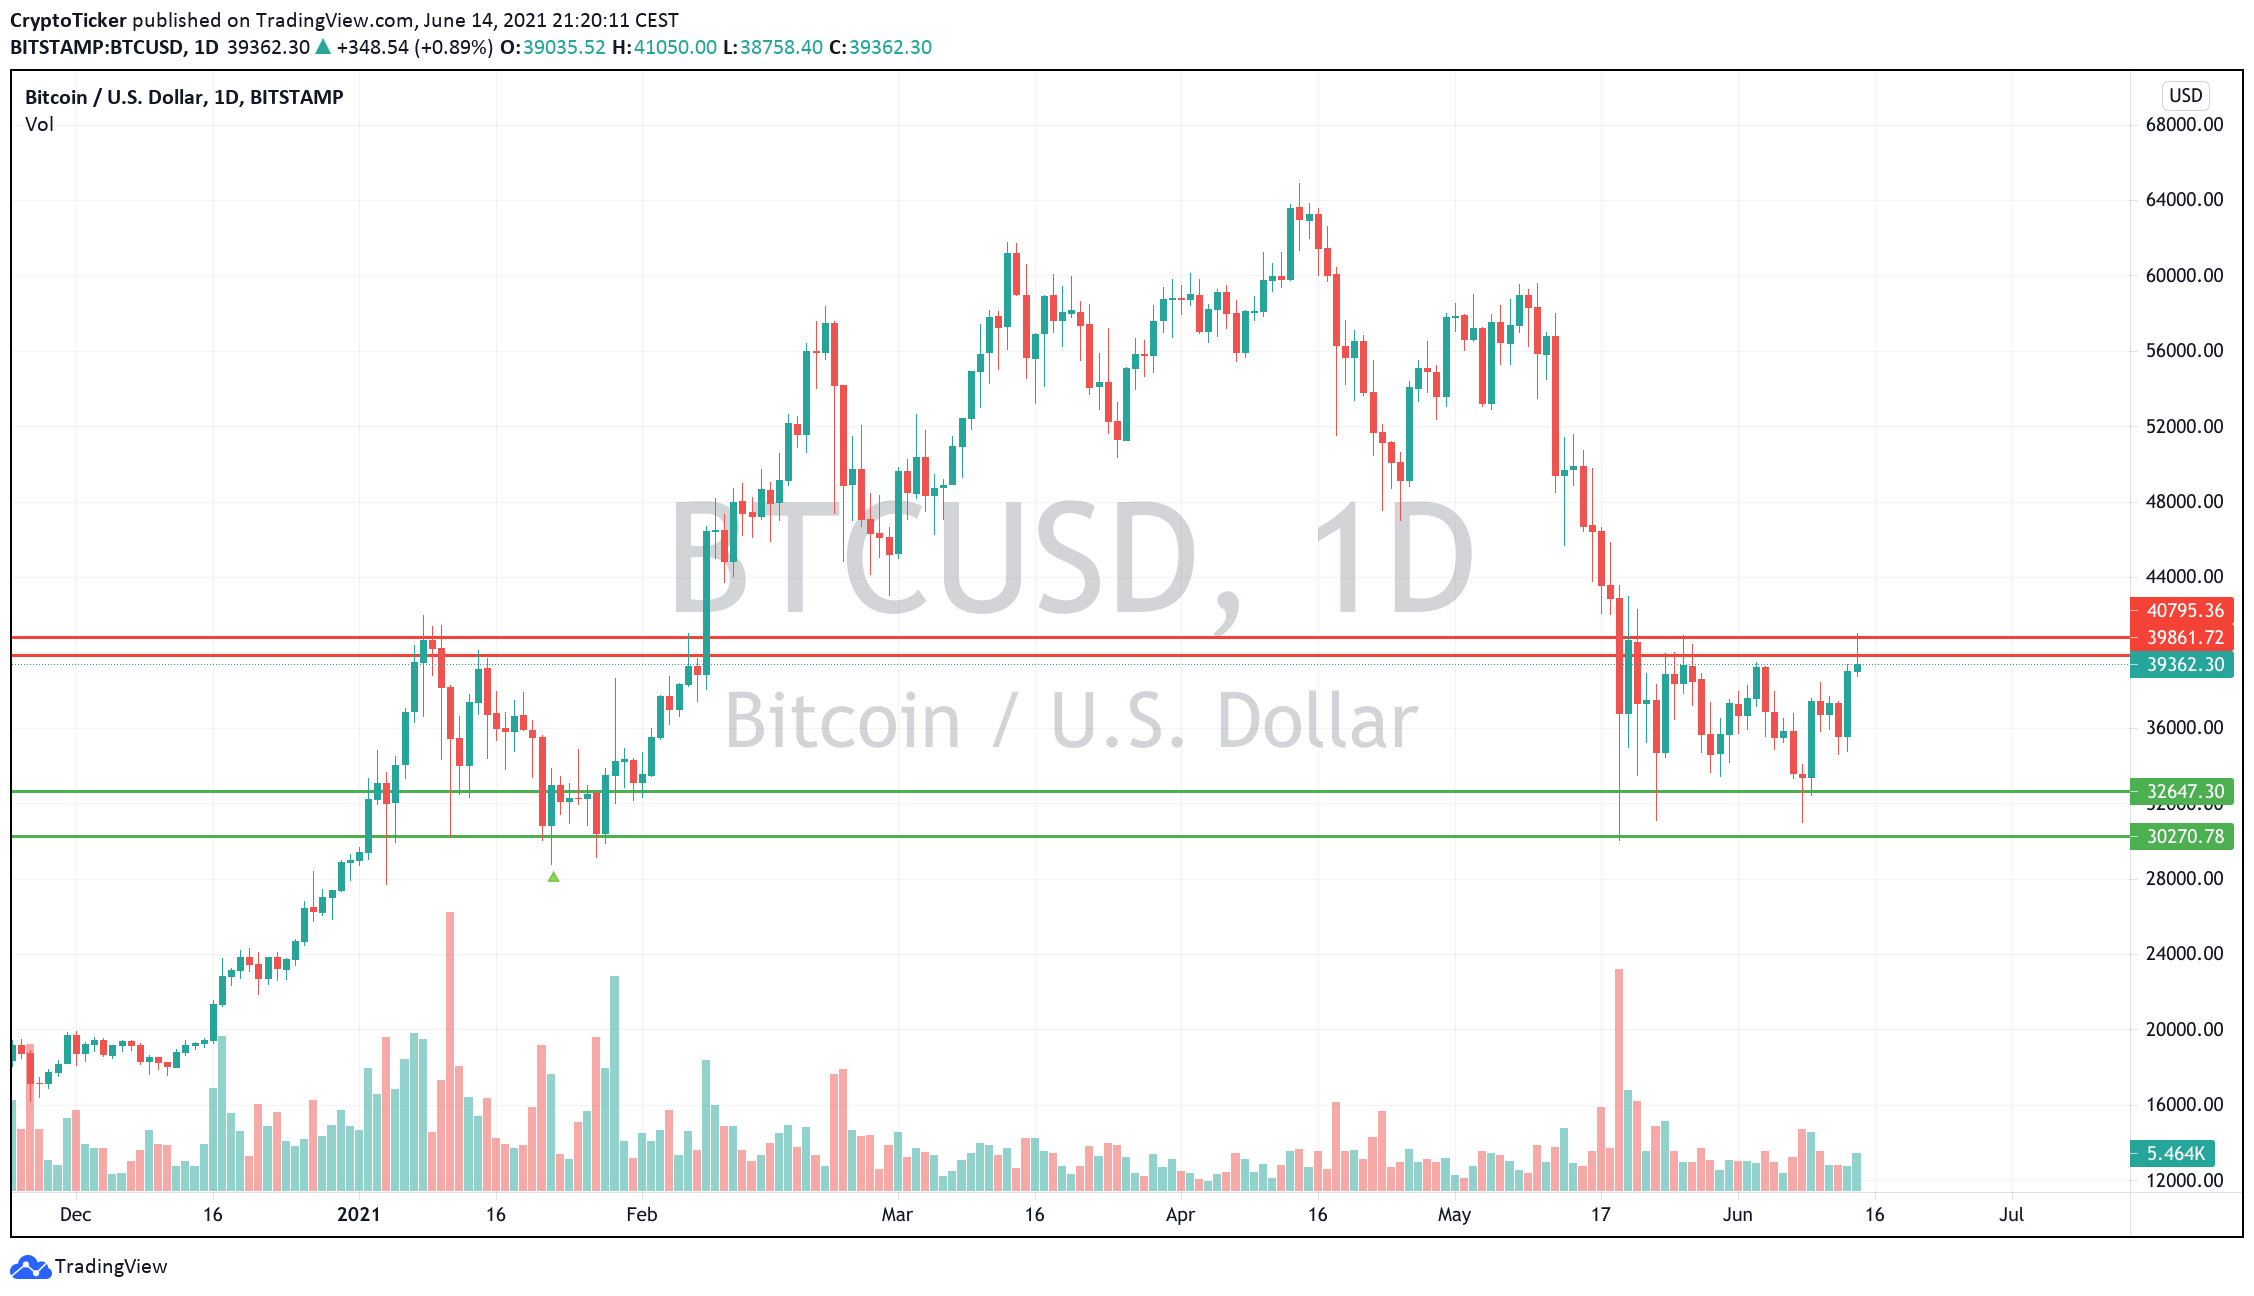 Bitcoin 40K: BTC/USD 1-day chart showing BTC's consolidation area